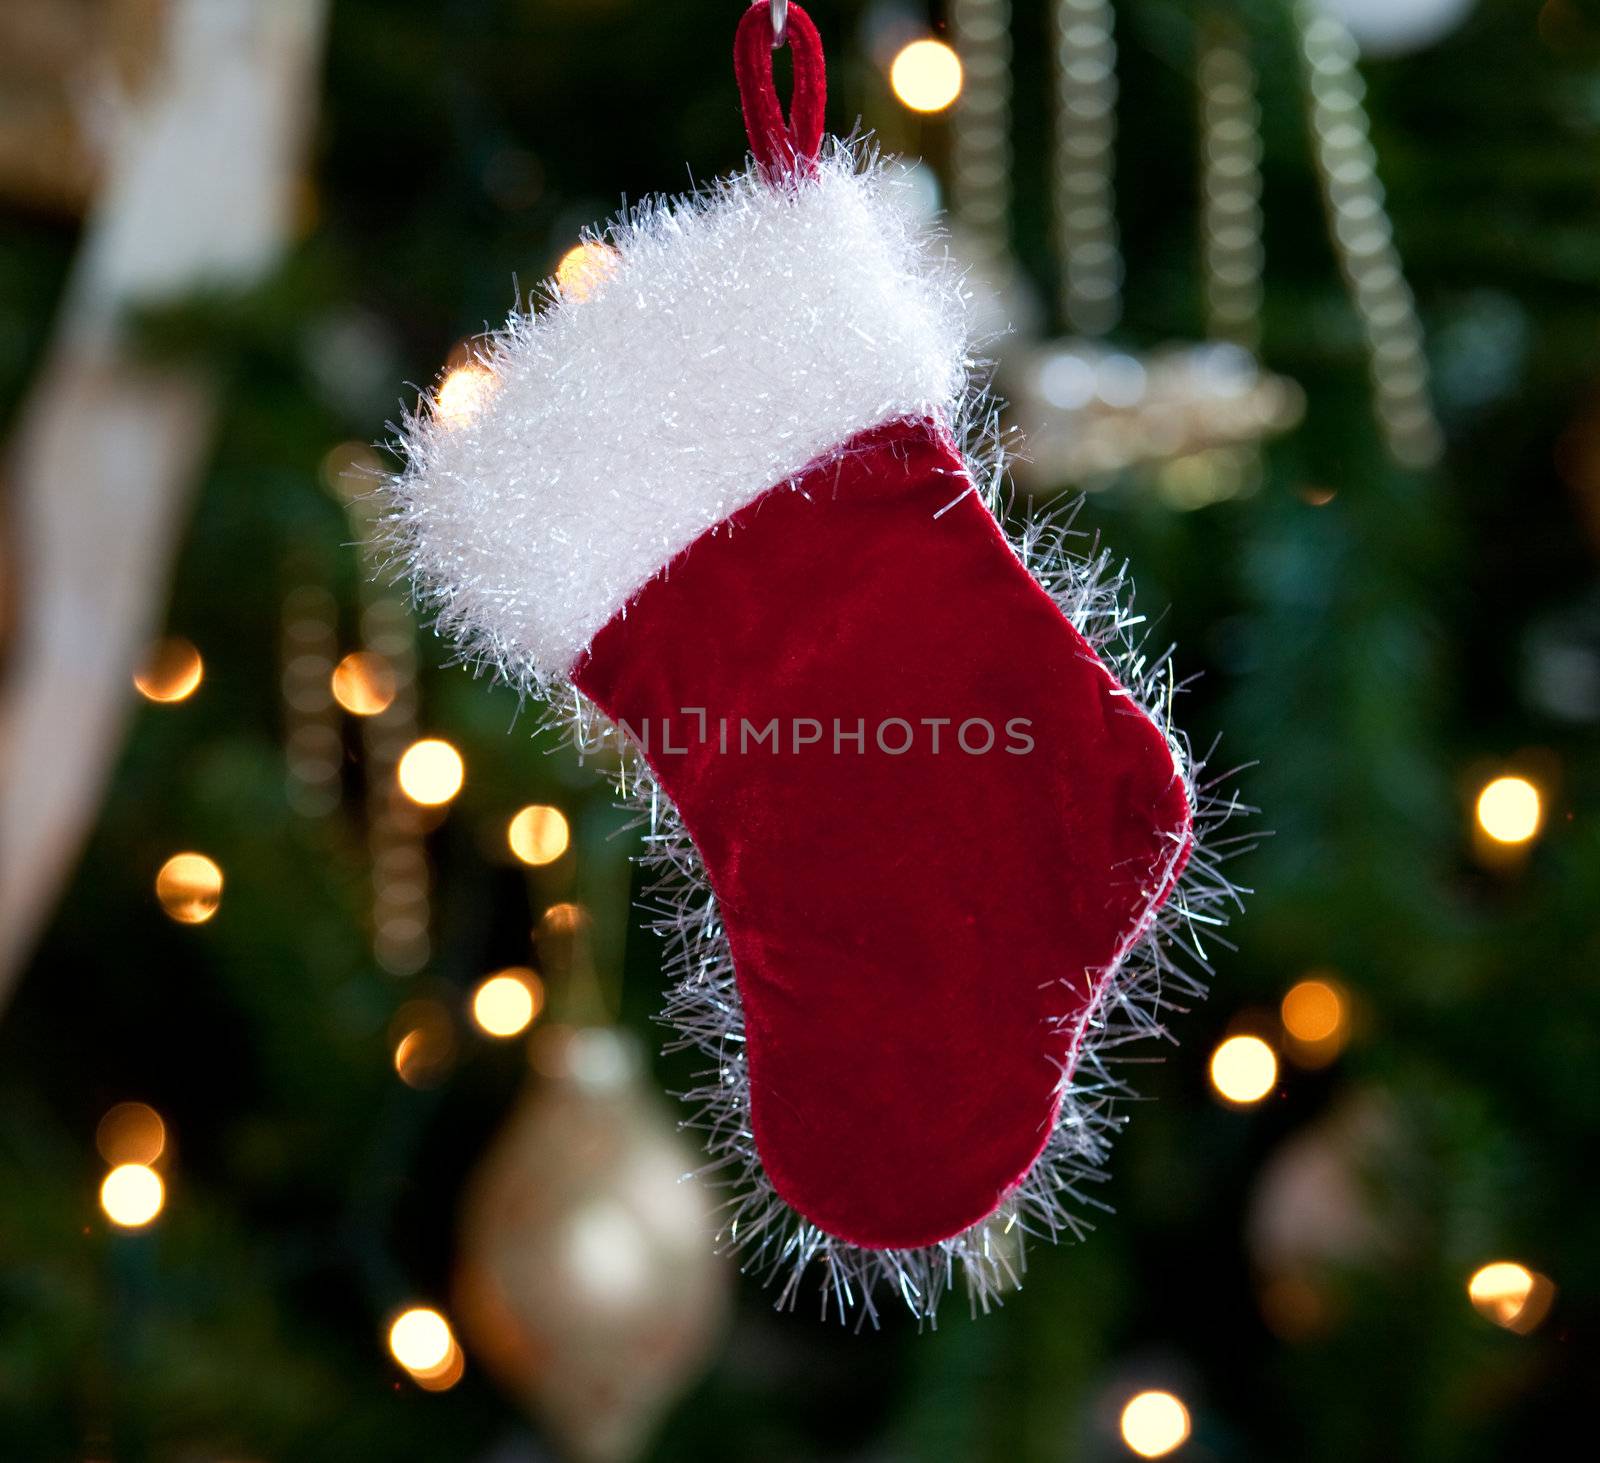 Backlit fur stocking in front of out of focus christmas tree and lights